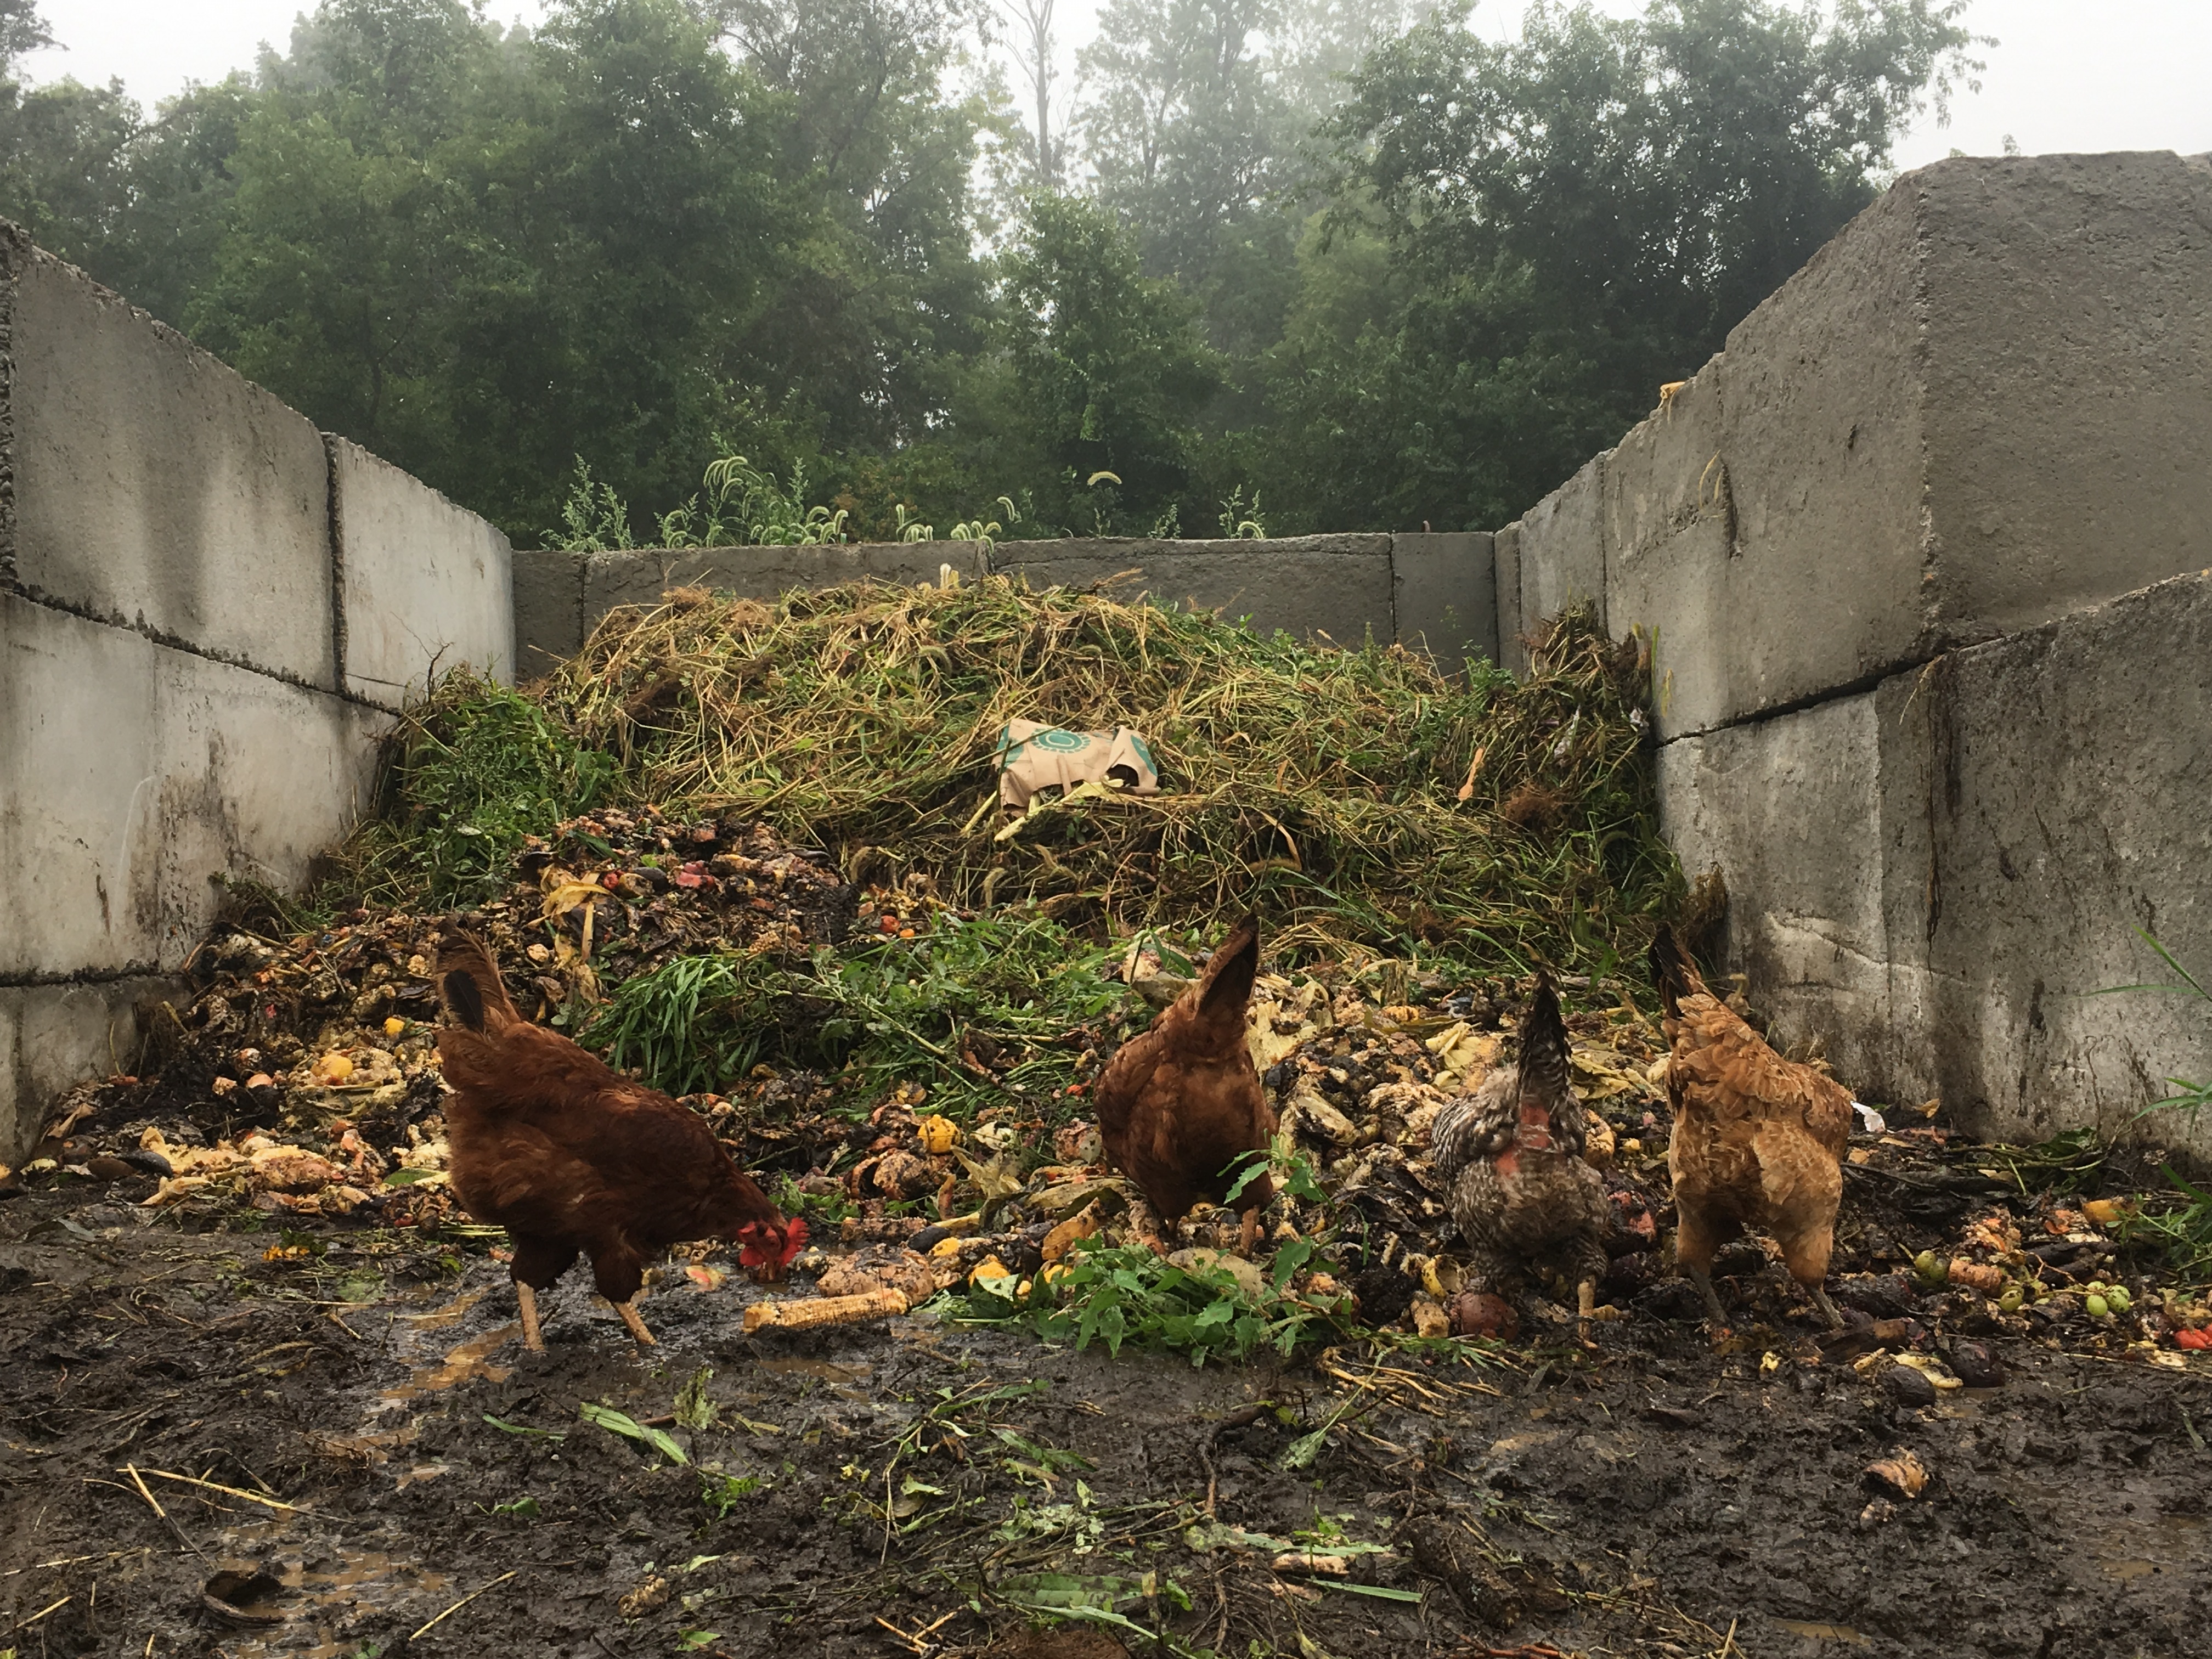 A traditional compost pile in the background with several chickens in the foreground